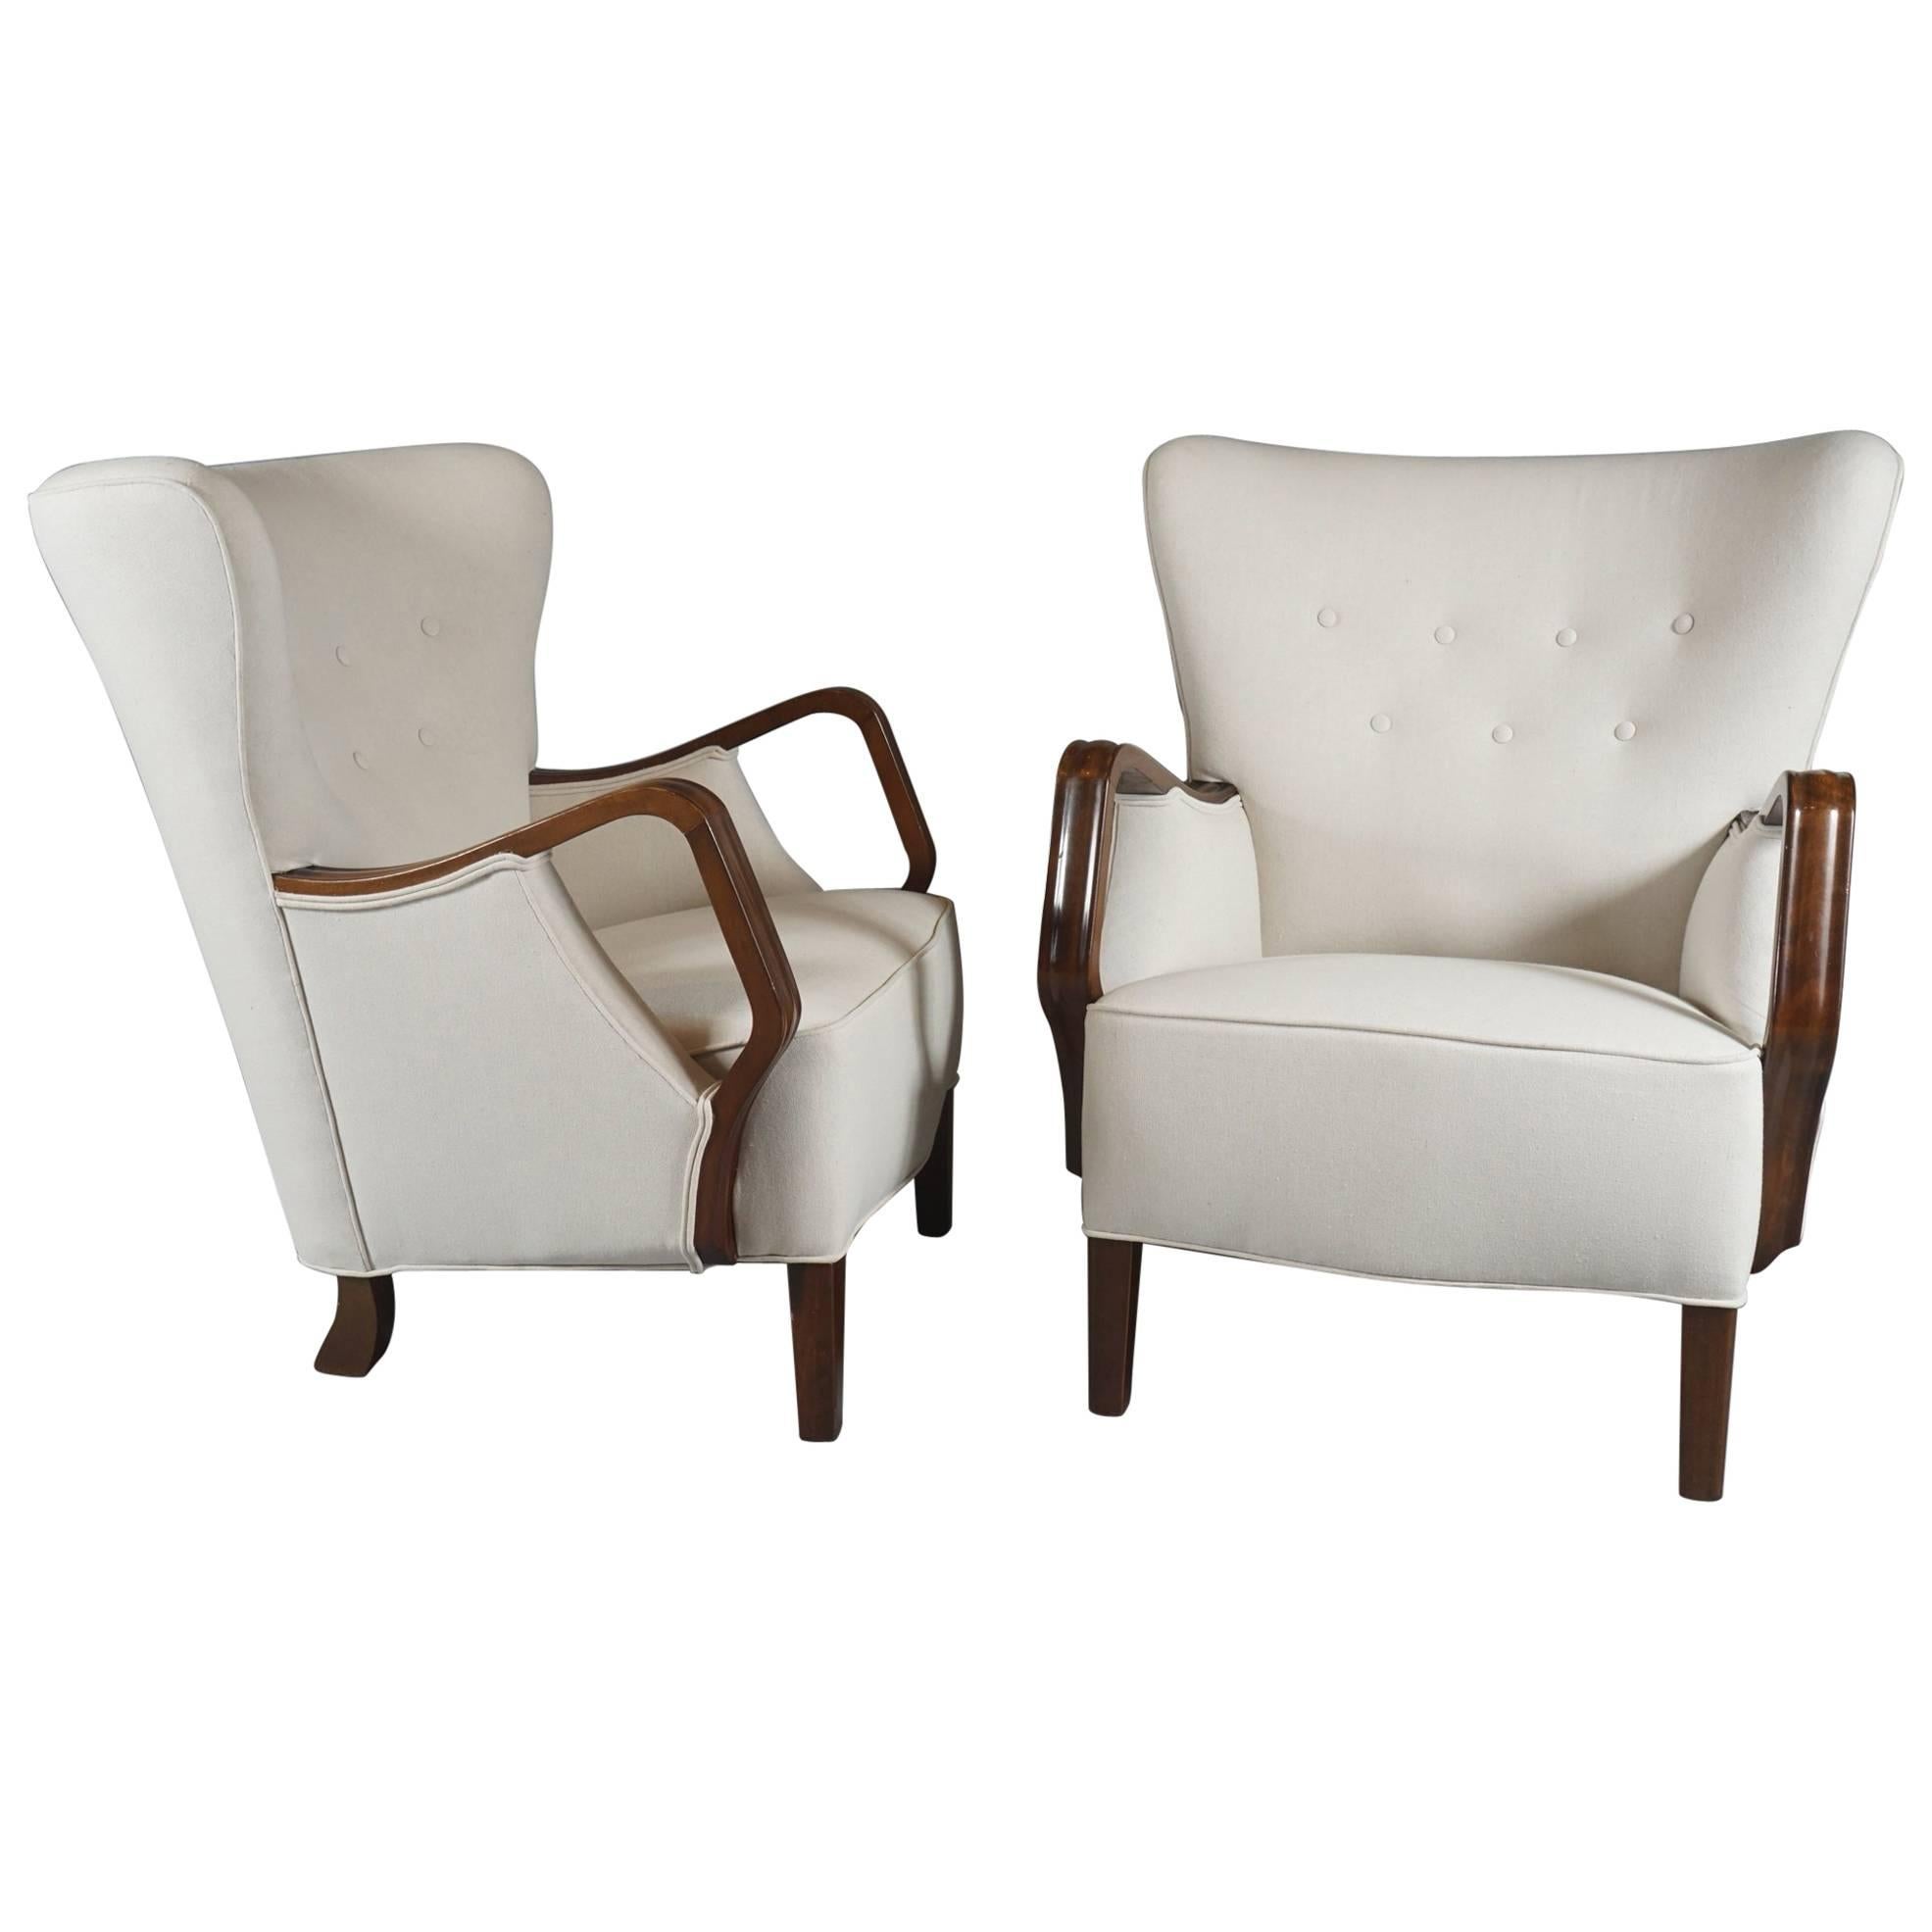 Pair of Architectural Armchairs